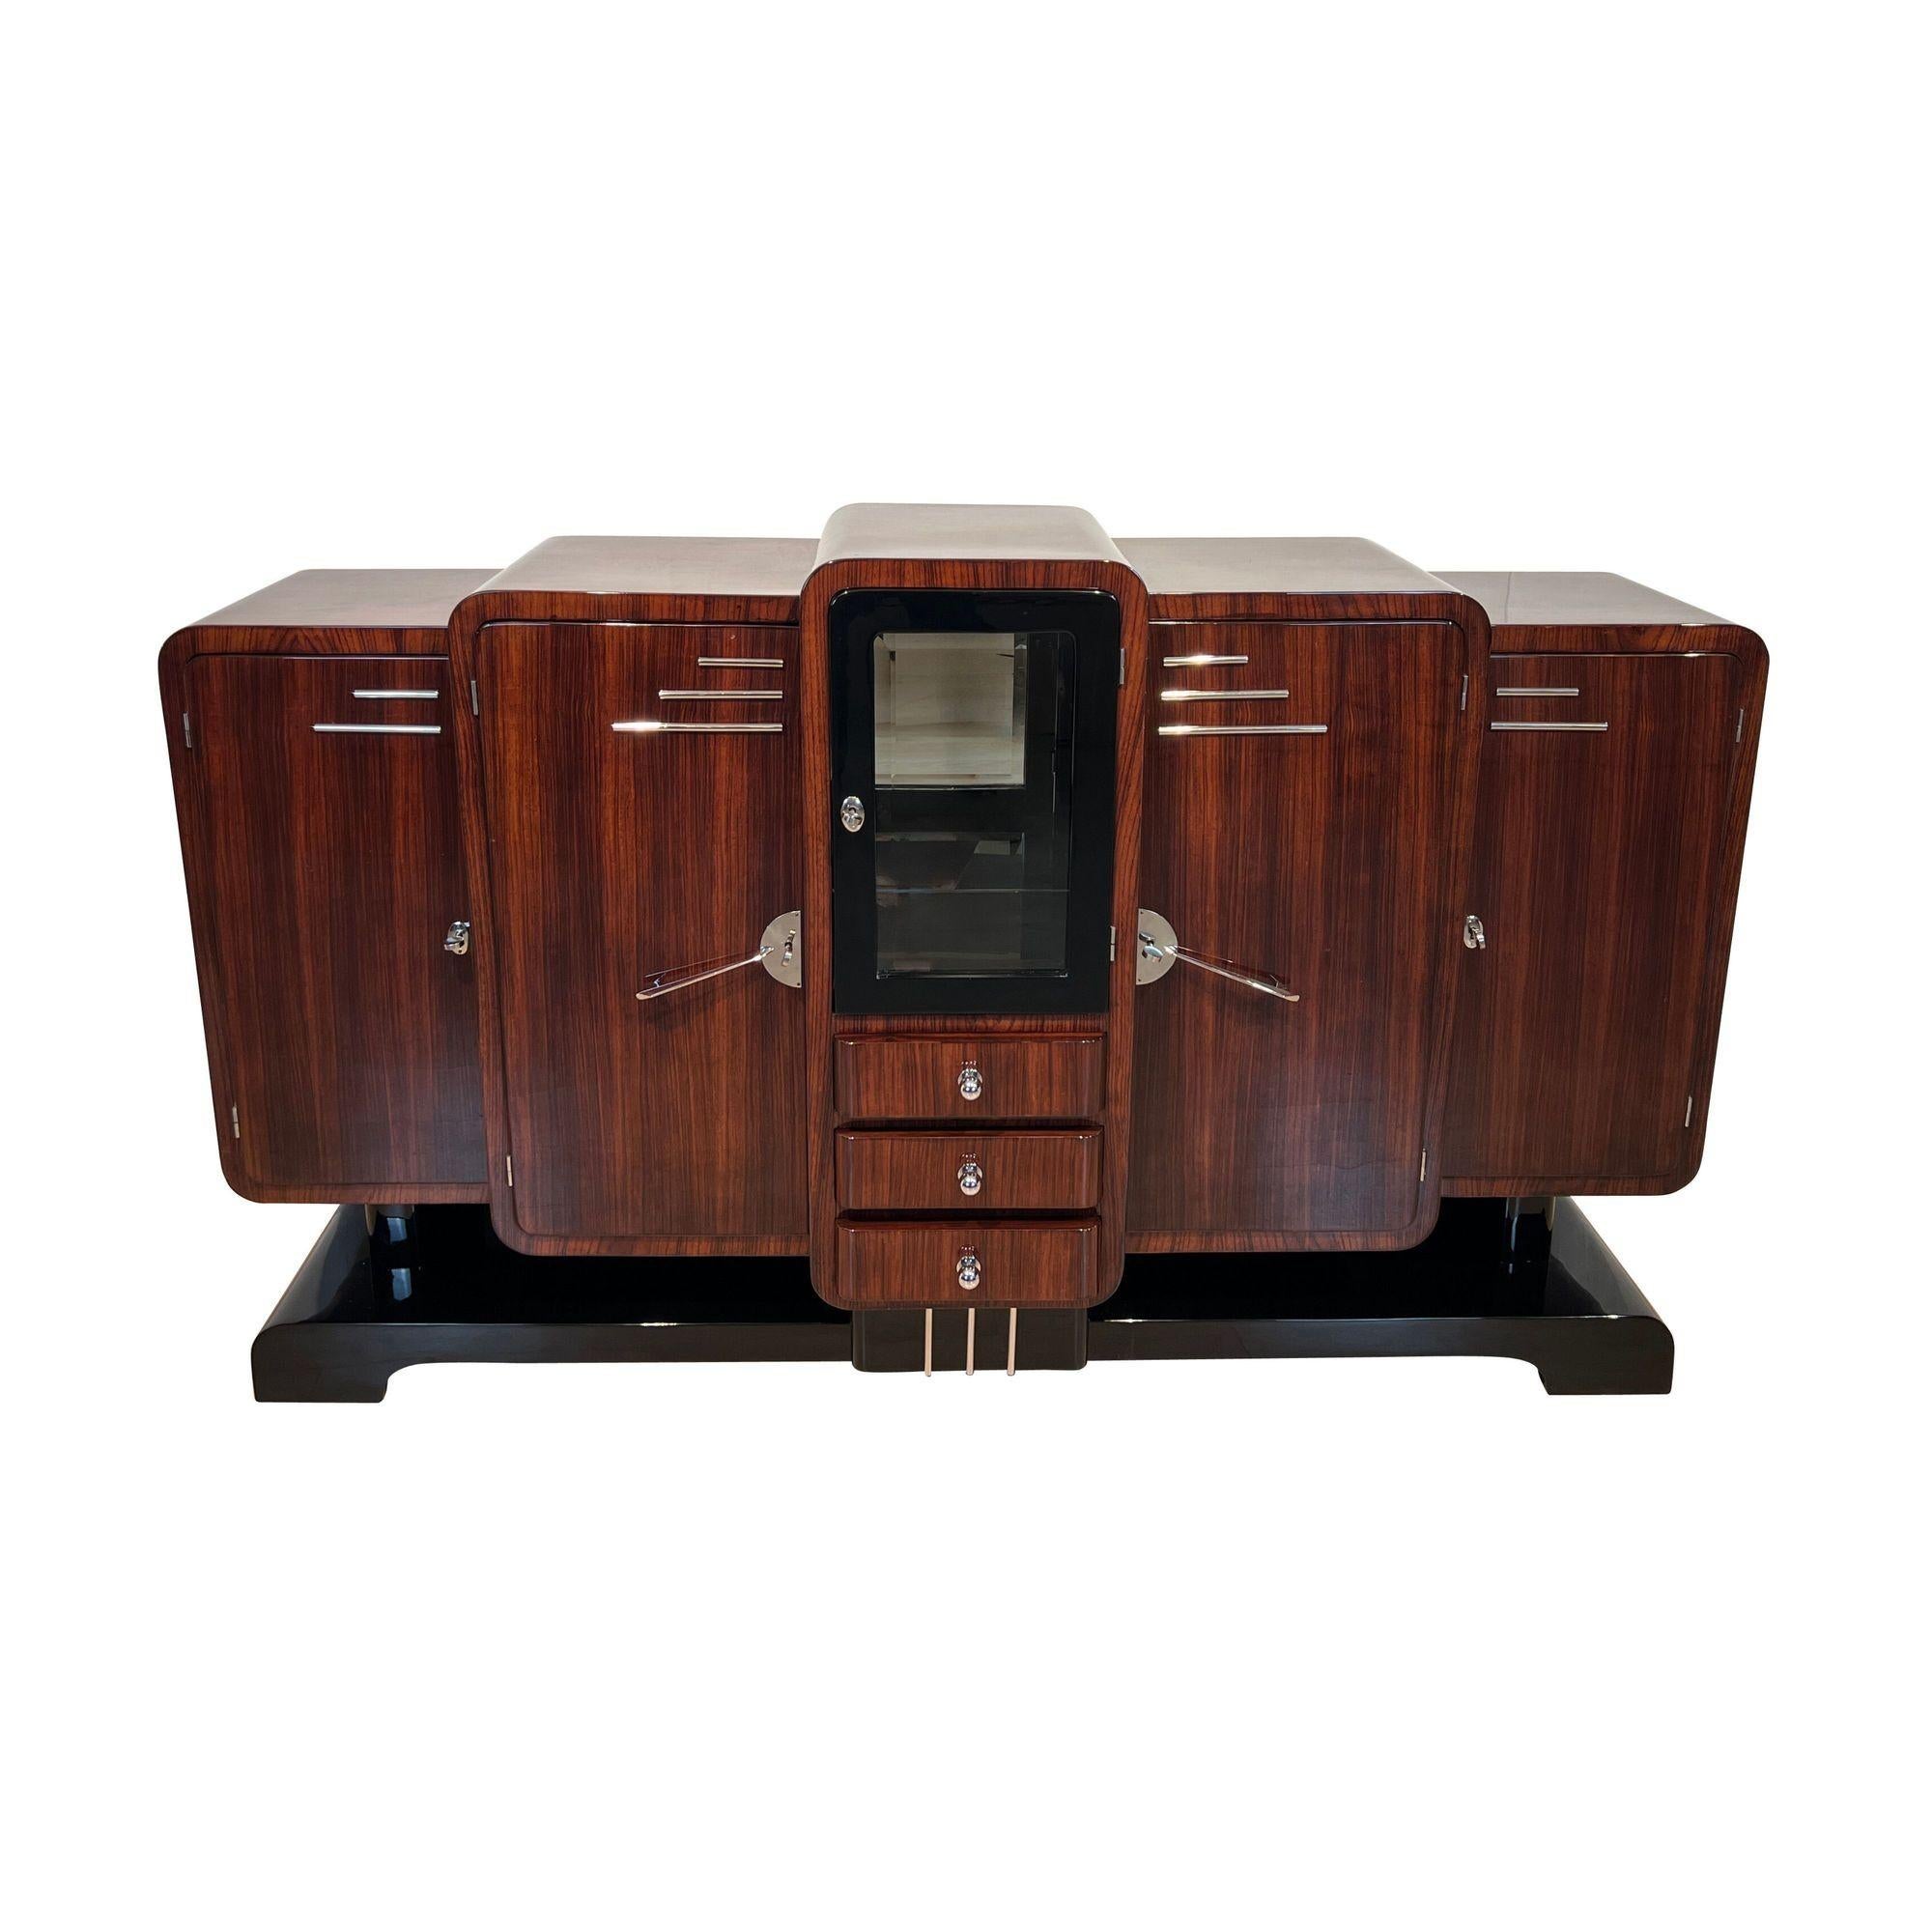 Stunning and very rare, original Art Deco Sideboard or Buffet from France around 1925.
Wonderful Rosewood veneer. Architecturally interesting tiered design, typical for the Art déco period.
Original chrome plated fittings, applications and locks.